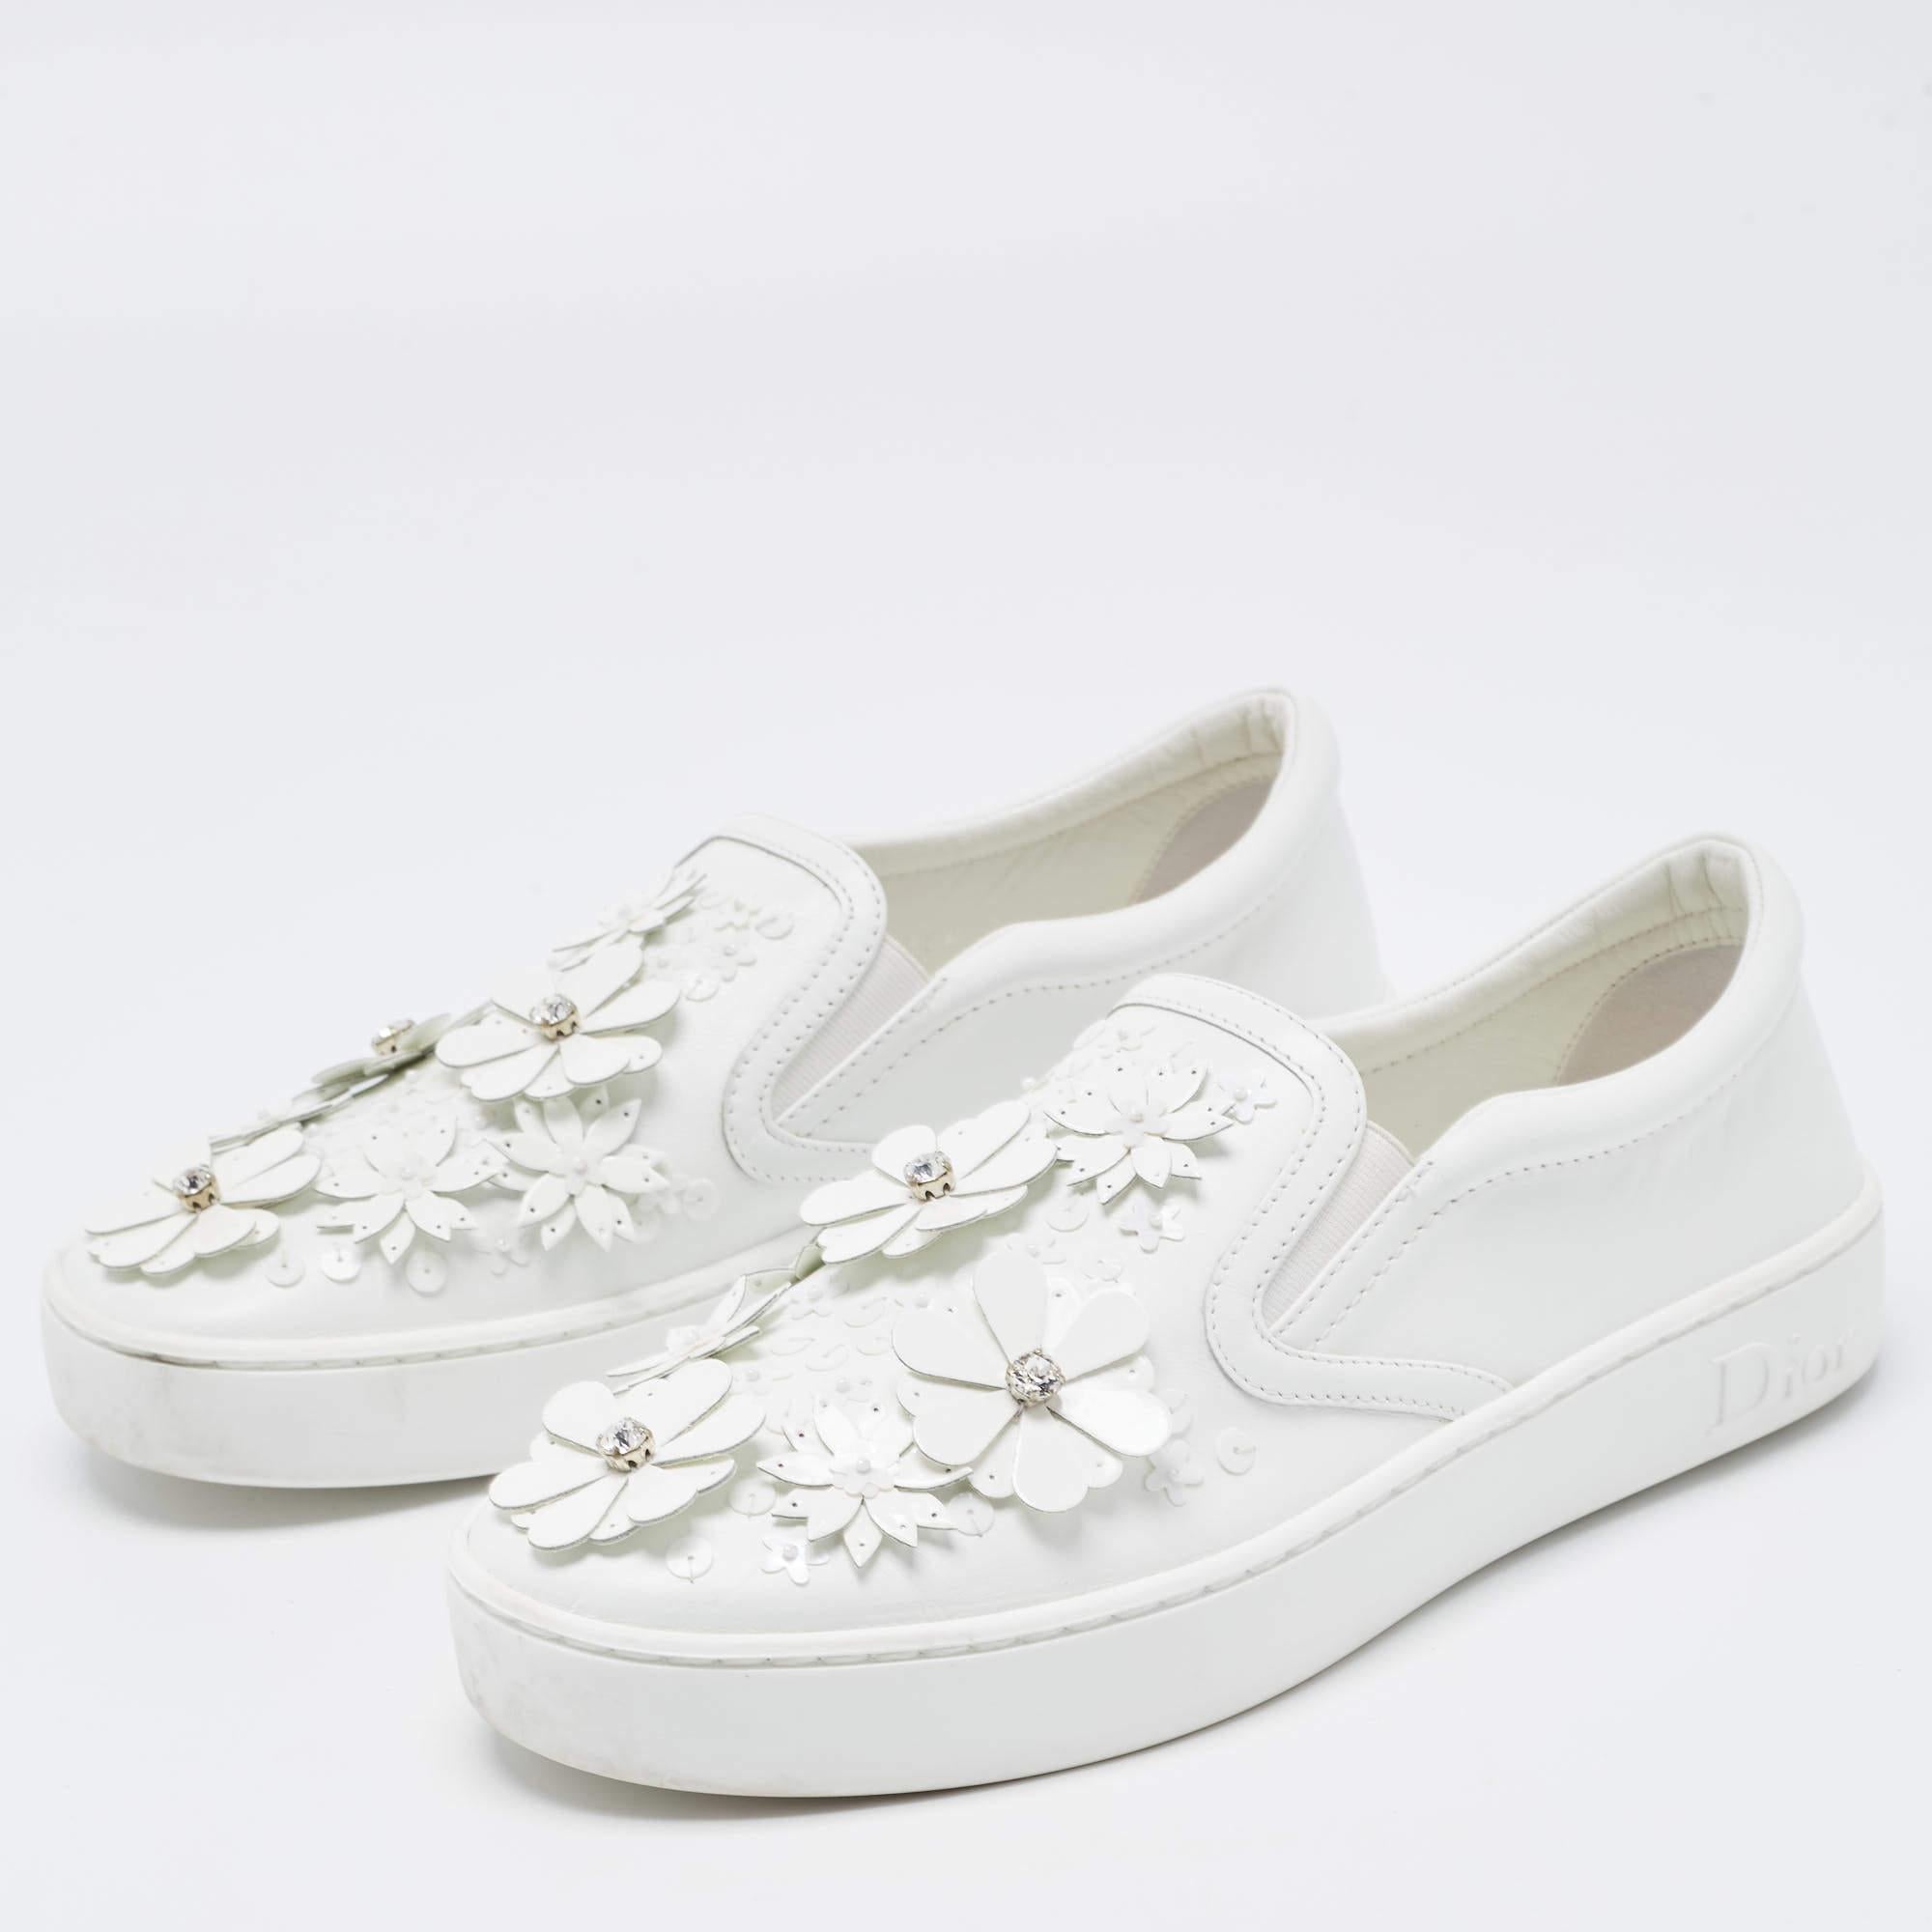 Dior White Leather Floral Crystal Embellished Slip On Sneakers Size 37 3